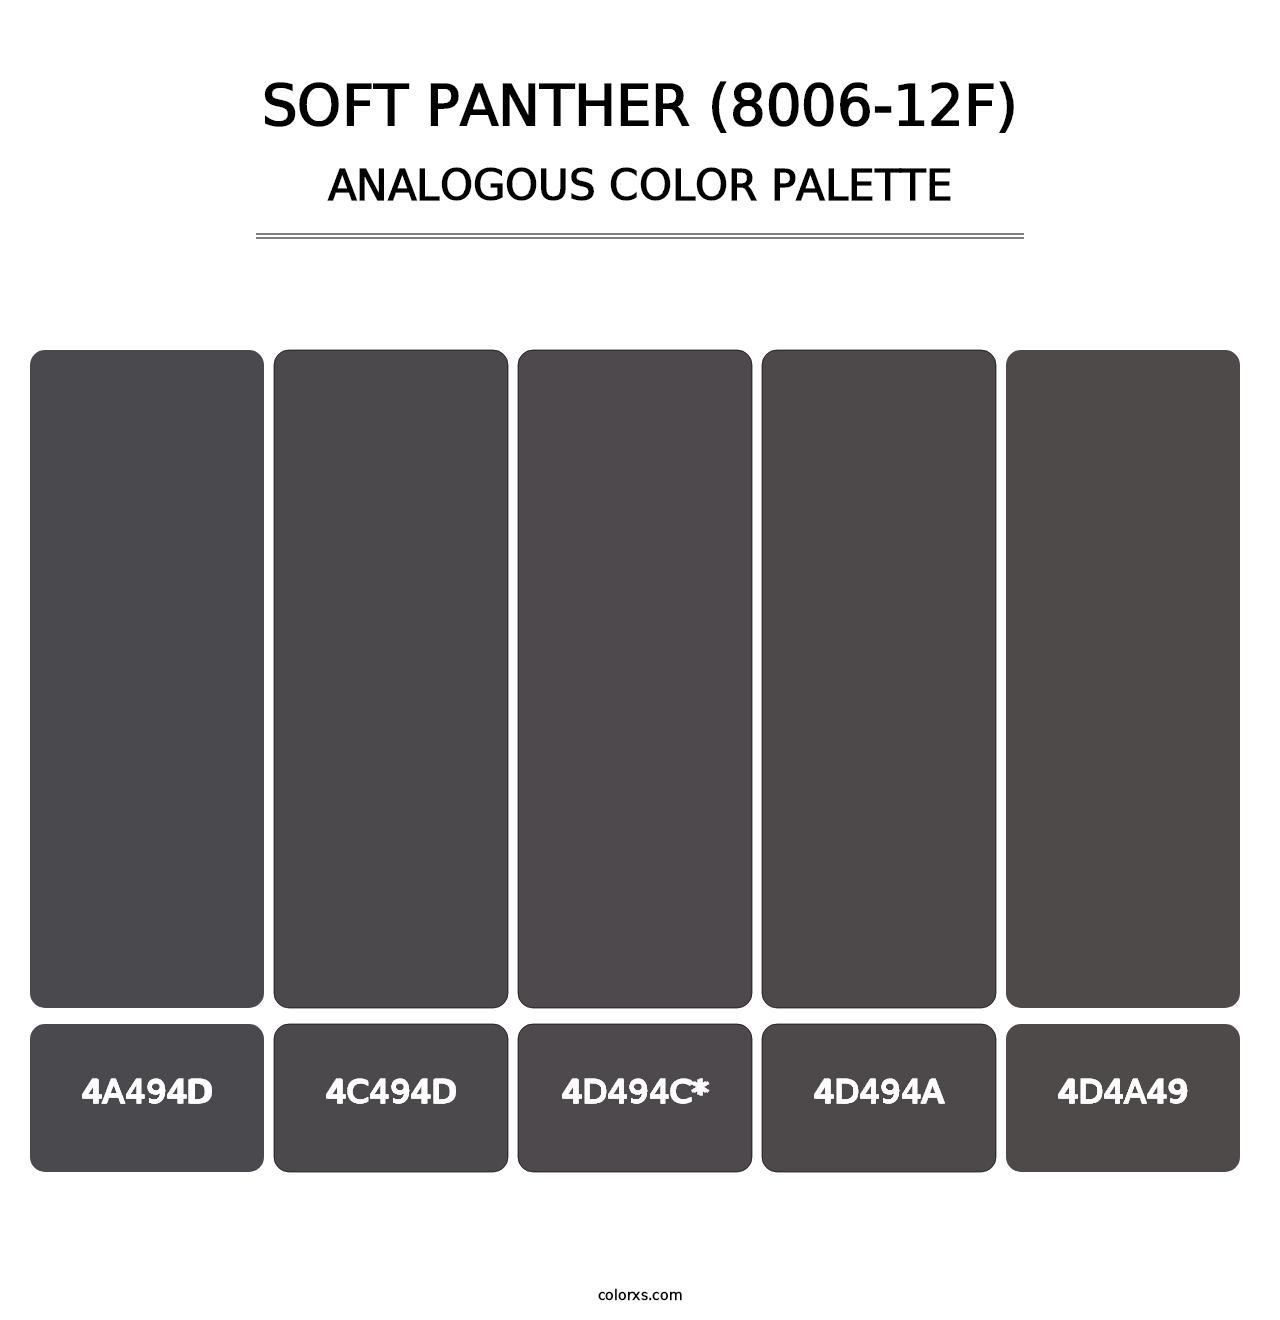 Soft Panther (8006-12F) - Analogous Color Palette